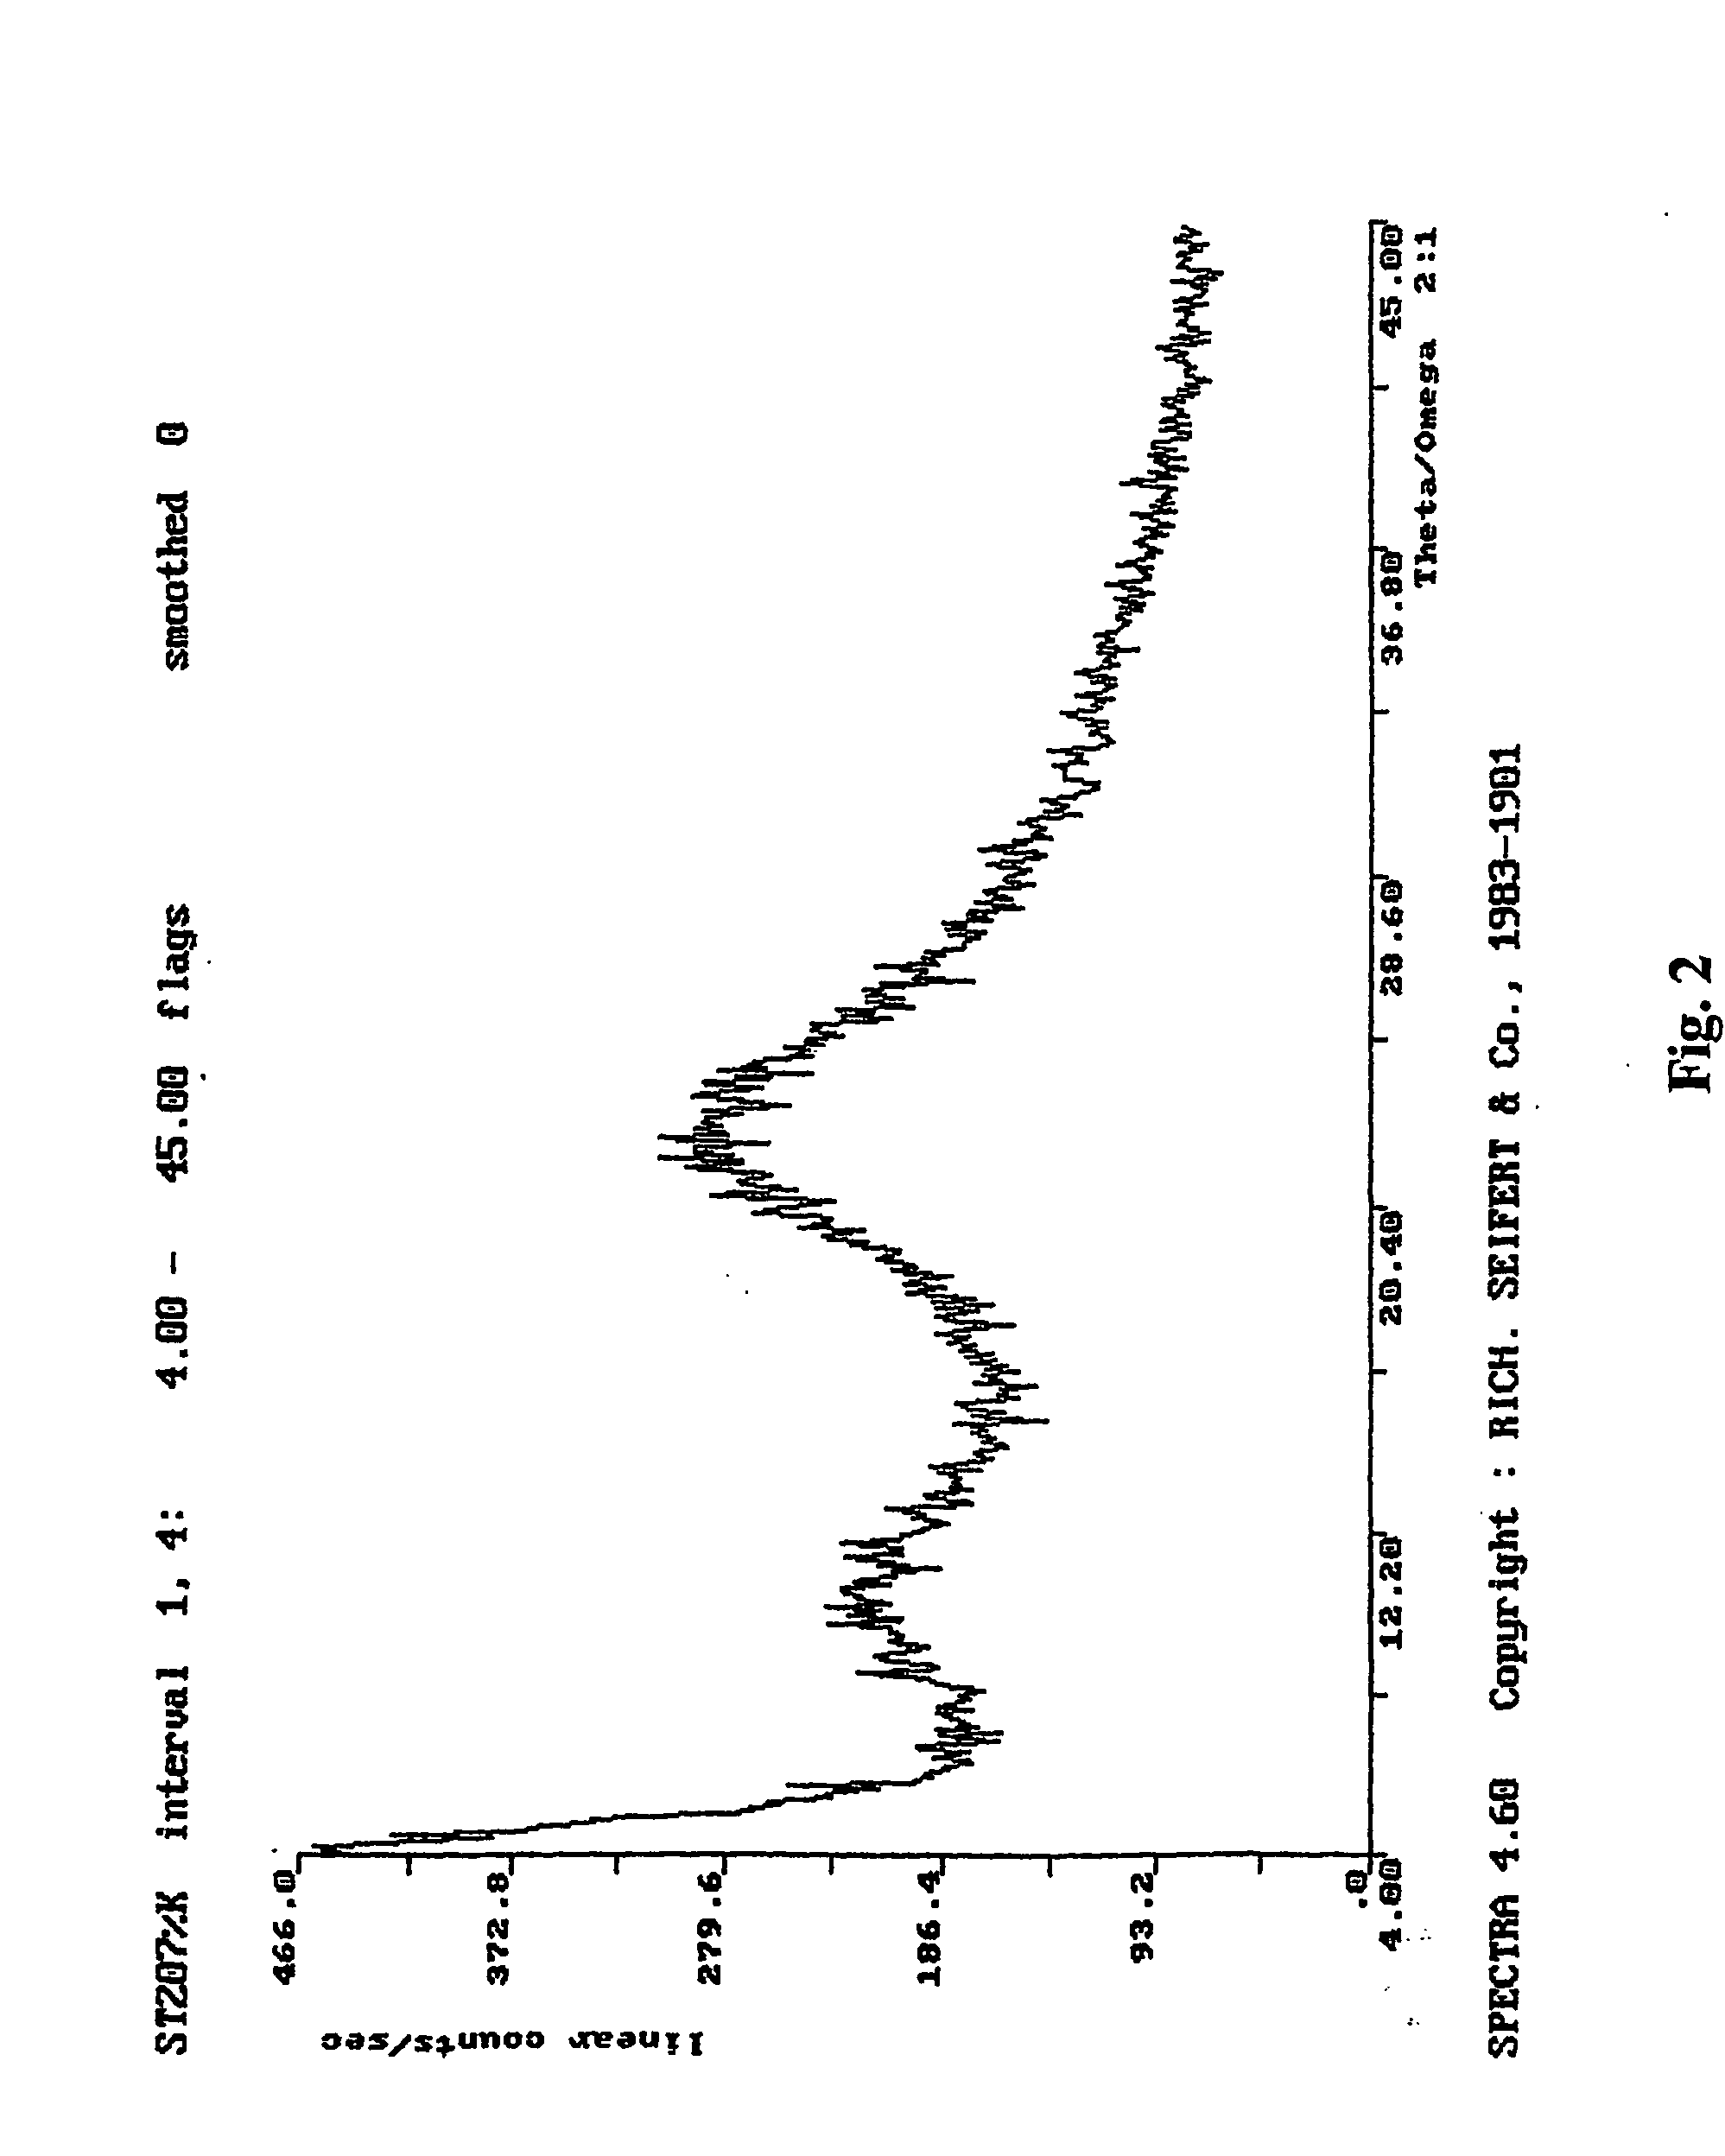 Method of manufacturing an amorphous form of the hemi-calcium salt of (3r, 5r) 7-3-phenly-4-phenylcarbamoyl-2-(4-fluorophenyl)-5-isopropyl-pyrrol-1-yl!-3, 5-dihydroxyheptanoic acid (actorvastatin)